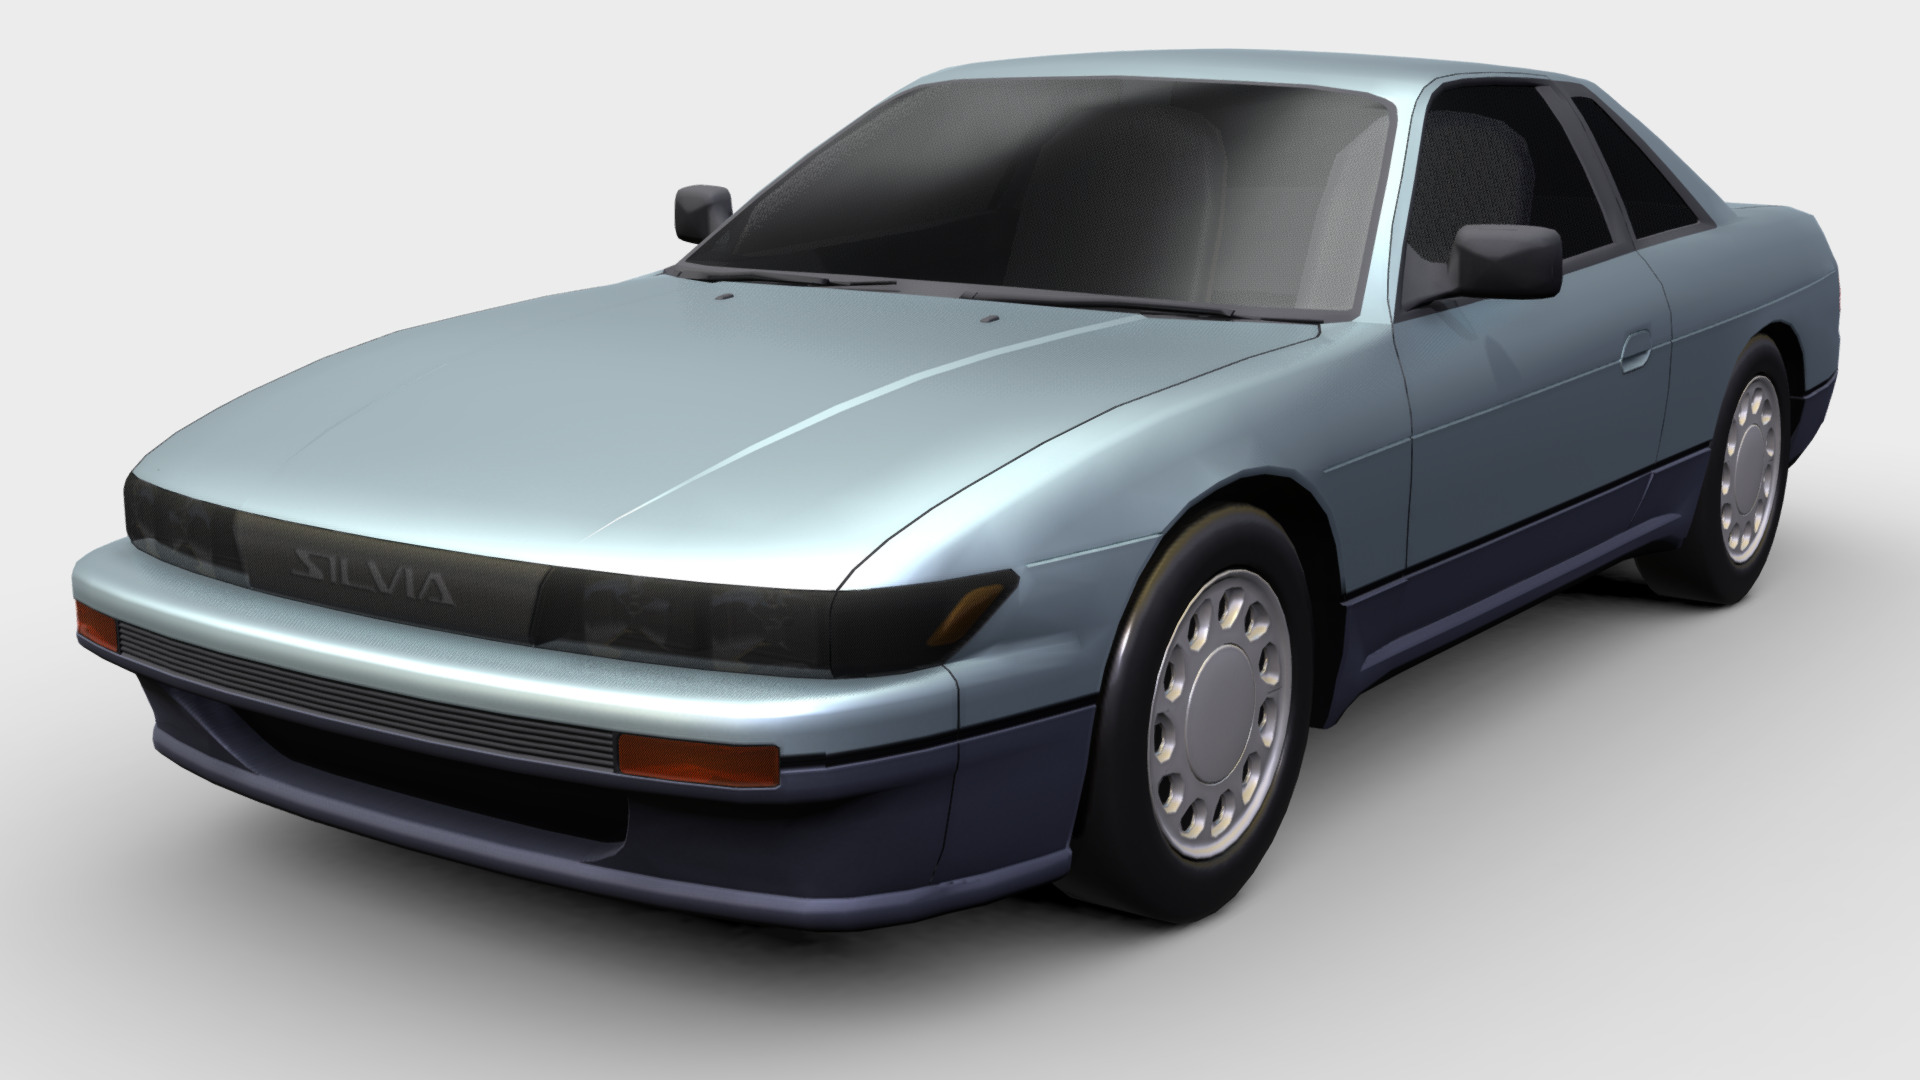 3D model Nissan Silvia - This is a 3D model of the Nissan Silvia. The 3D model is about a silver car with a black top.